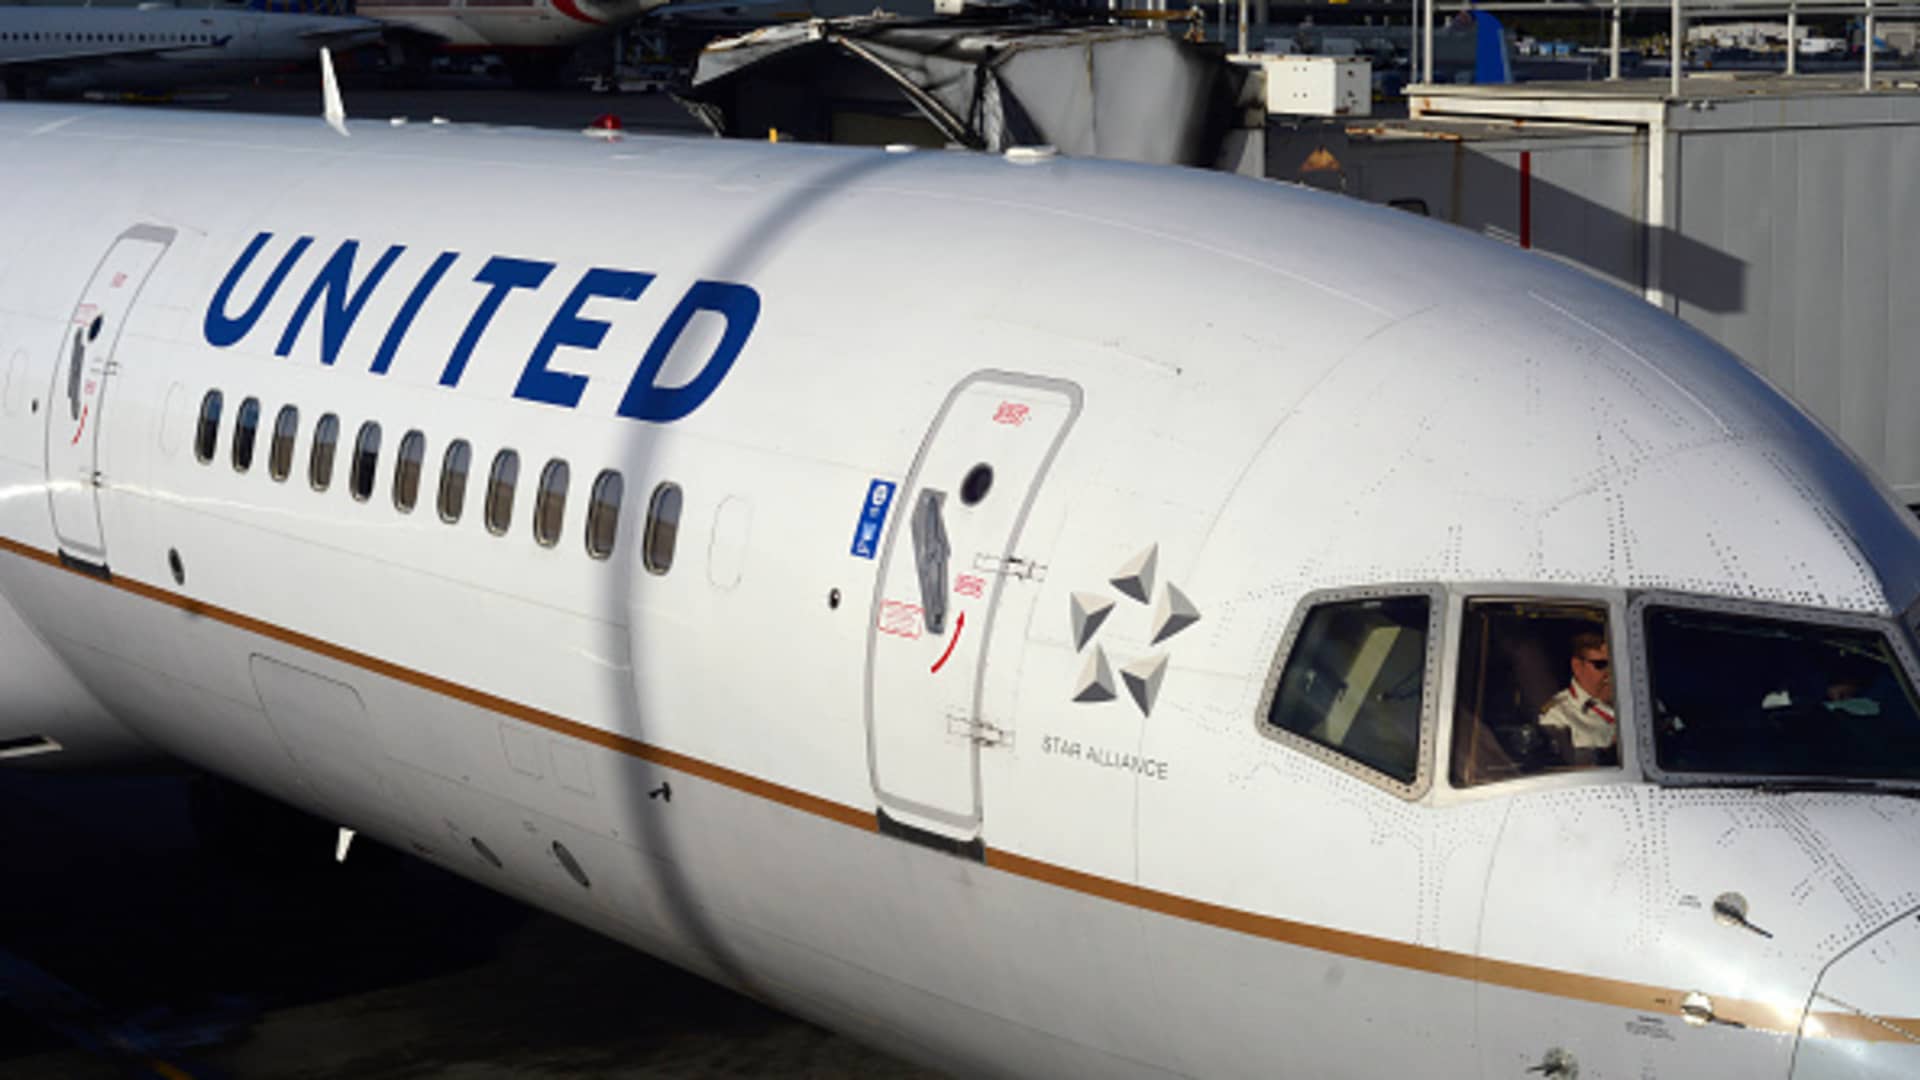 United Airlines plans 0 million expansion of pilot training center during hiring spree